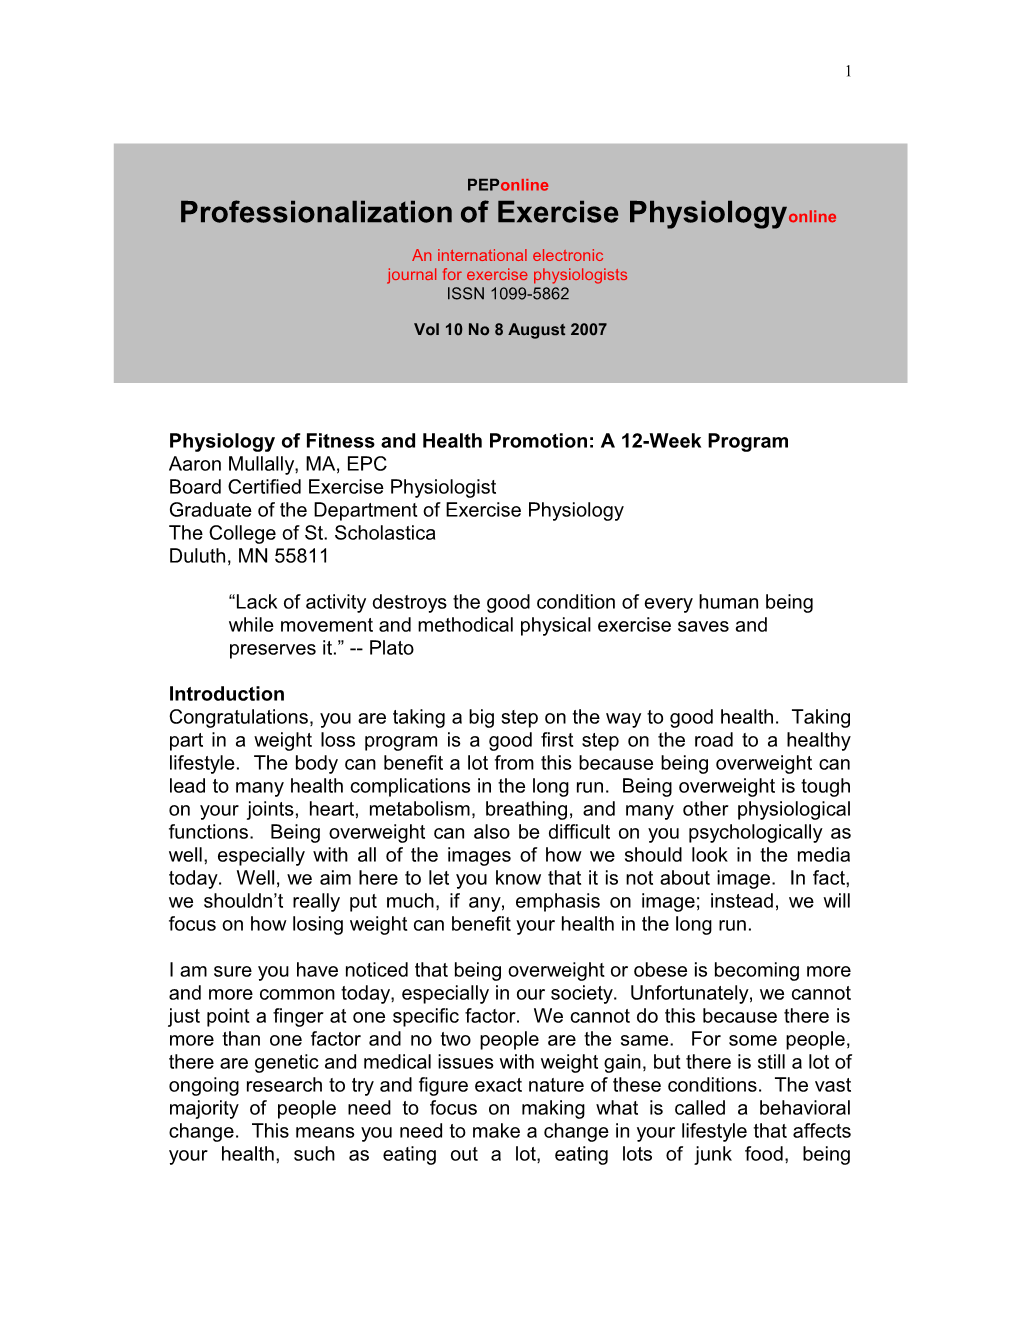 Physiology of Fitness and Health Promotion: a 12-Week Program